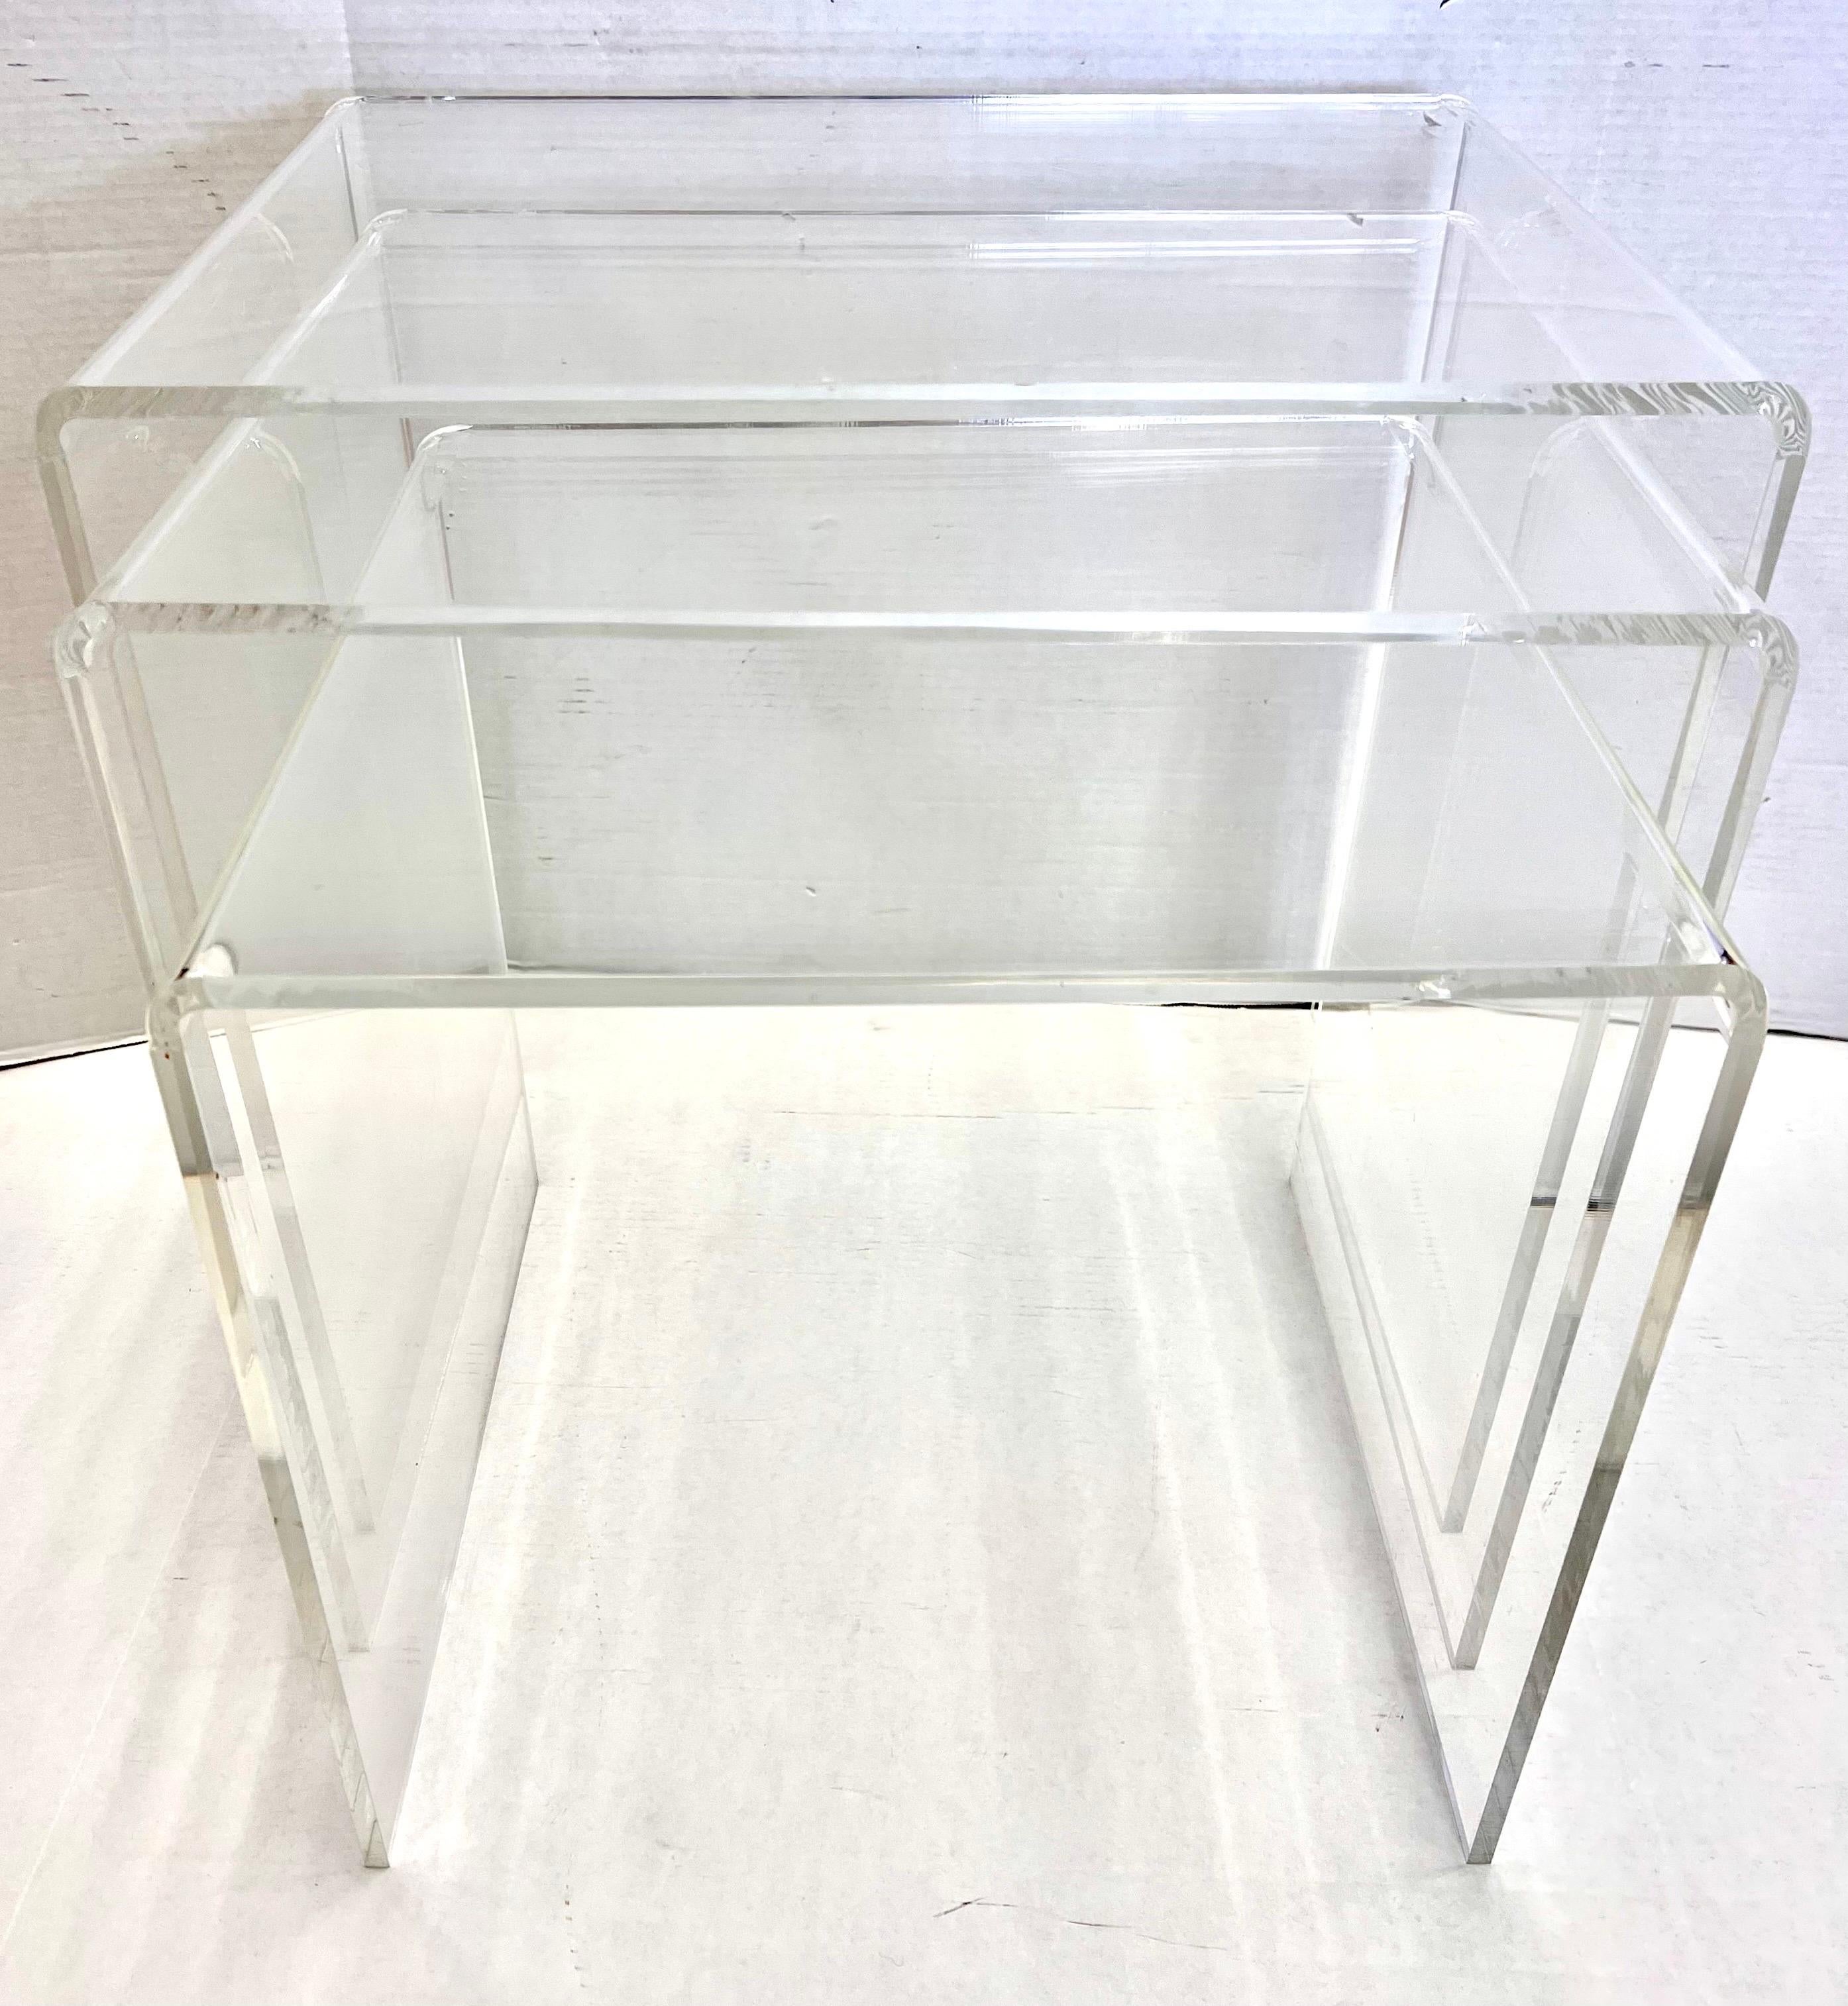 Vintage midcentury Lucite nesting waterfall tables made of molded arylic with clean edges. They nest together perfectly or can be scattered, your call! These are true period pieces, not the cheap lightweight plastic reproductions in other homes -